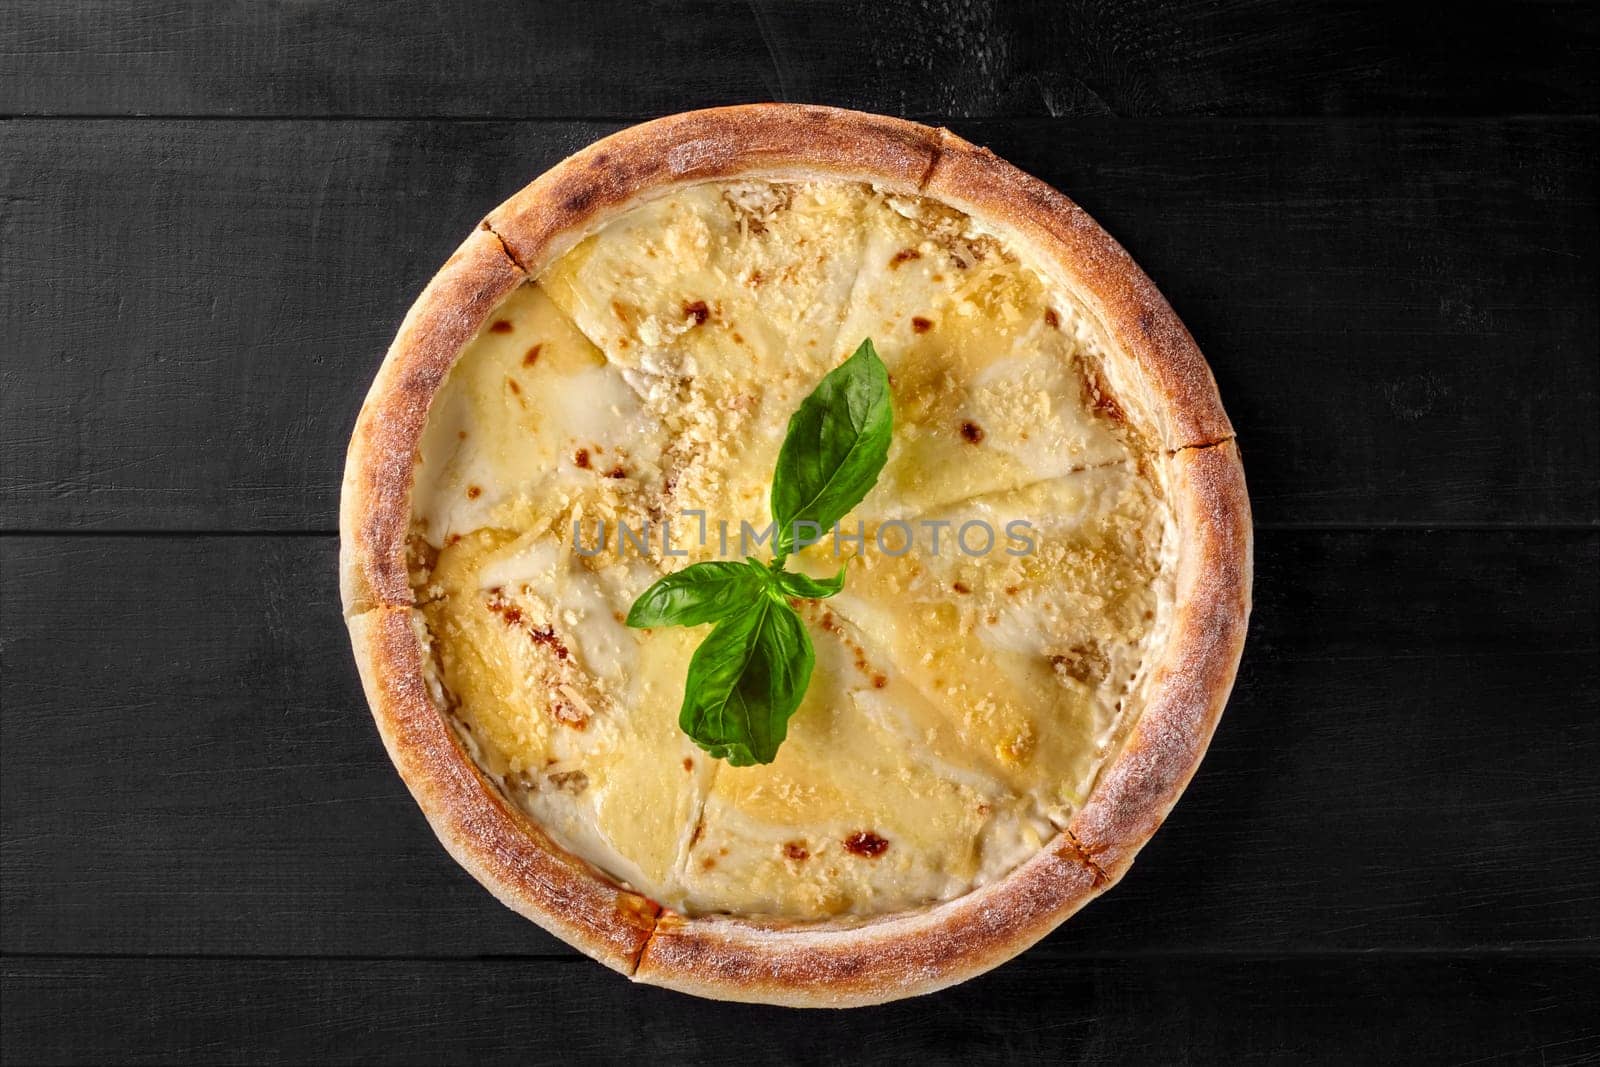 Appetizing browned cheese crust on freshly baked pizza quattro formaggi garnished with fresh fragrant green basil. Popular authentic Italian dish